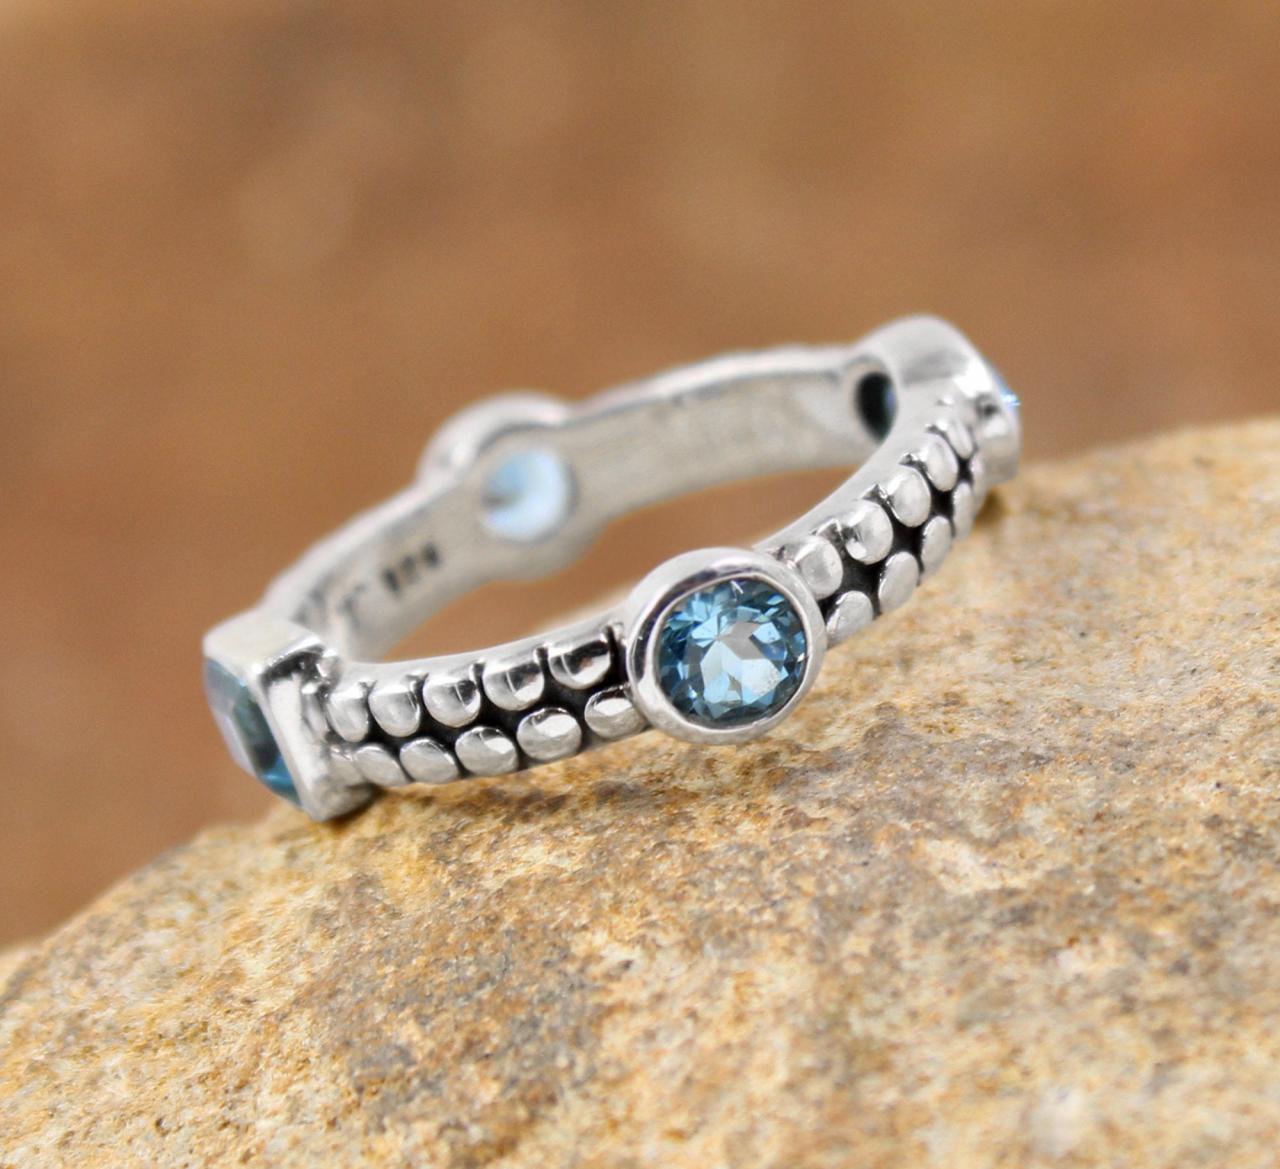 Blue Topaz Eternity Band ,solid 925 Sterling Silver Oxidized Jewelry,promise Ring,anniversary Ring Band,wedding Jewelry,bridal Shower Ring